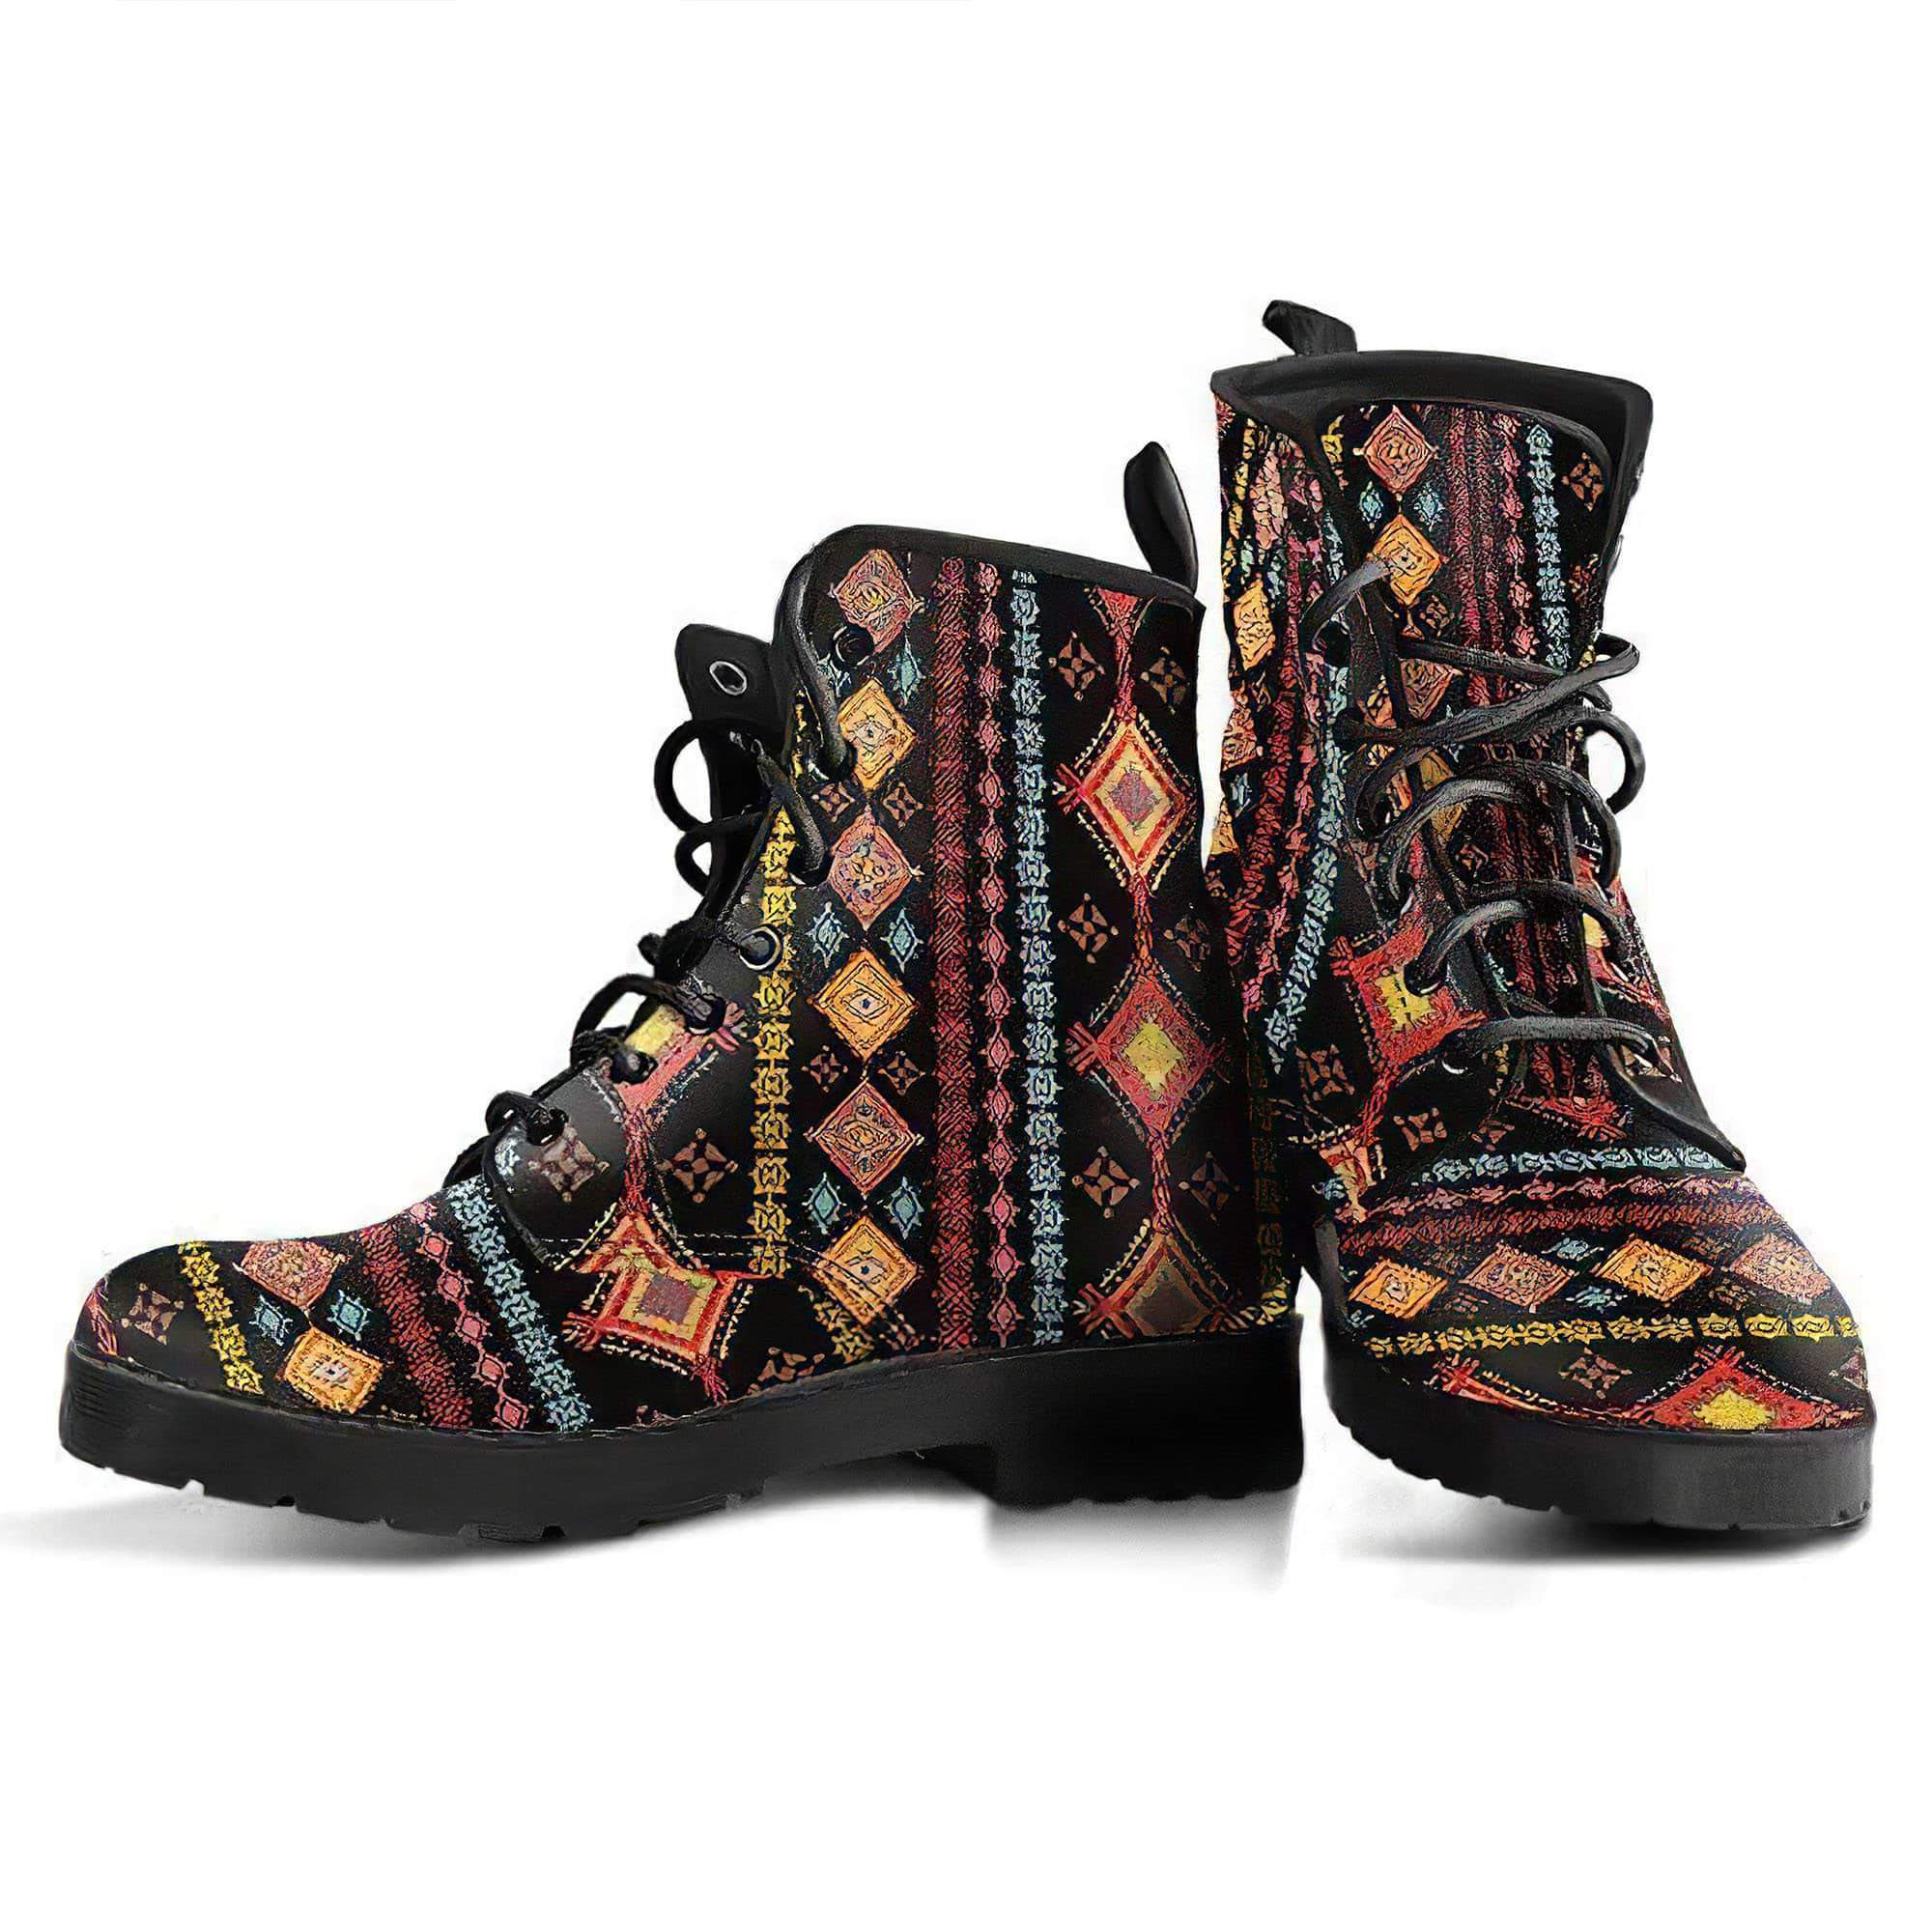 tribal-pattern-handcrafted-boots-women-s-leather-boots-12051969736765.jpg